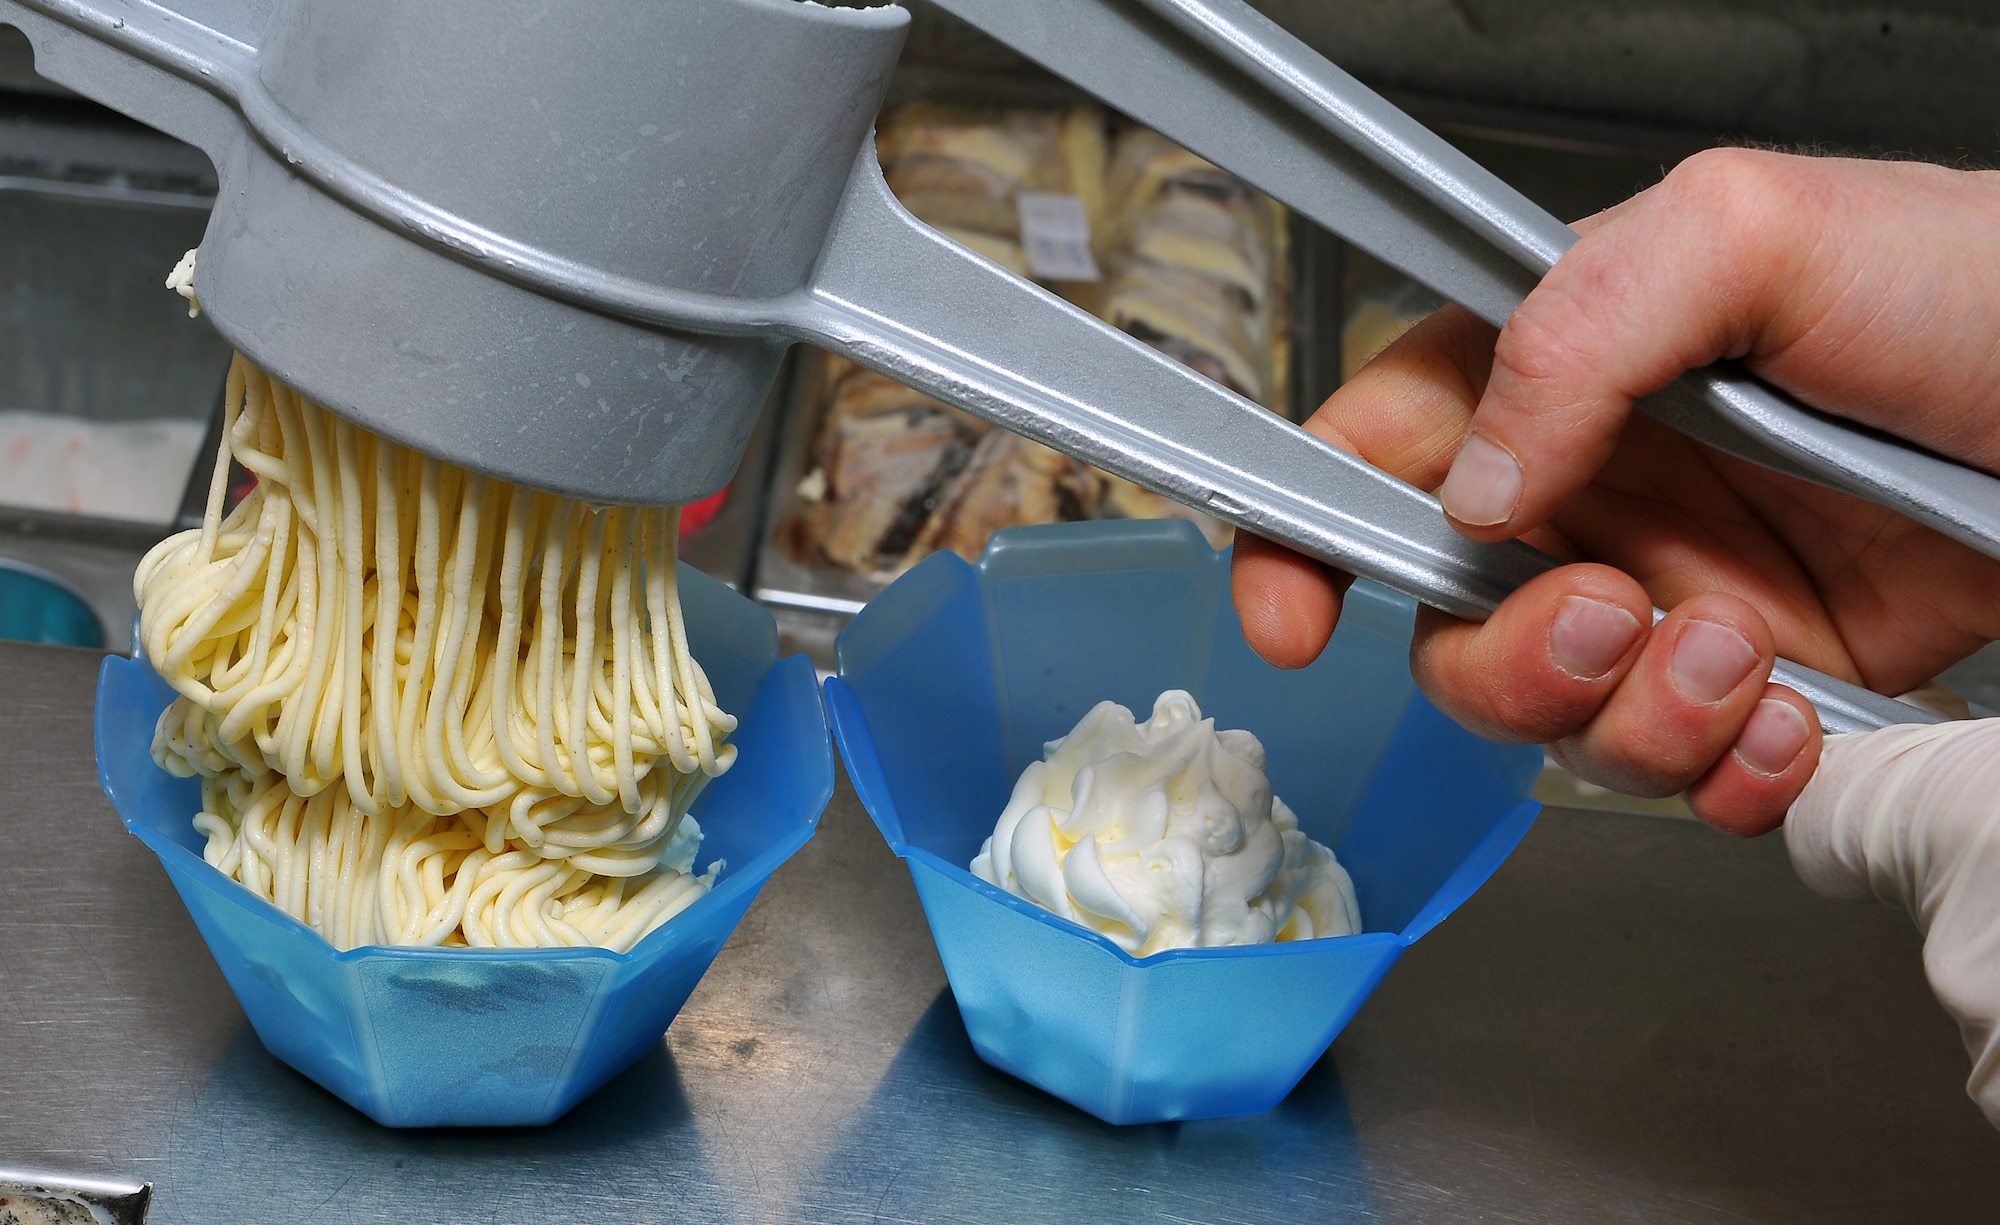 Fabio Montebello, base ice cream man, prepares “spaghetti ice” his most popular frozen treat, April 19, 2013, Ramstein Air Base, Germany. Fabio Montebello, known by base locals as “Fabio the gelato man,” is an ice cream vendor who travels more than an hour away every day to deliver frozen treats to the base. (U.S. Air Force photo/Airman 1st Class Dymekre Allen)     